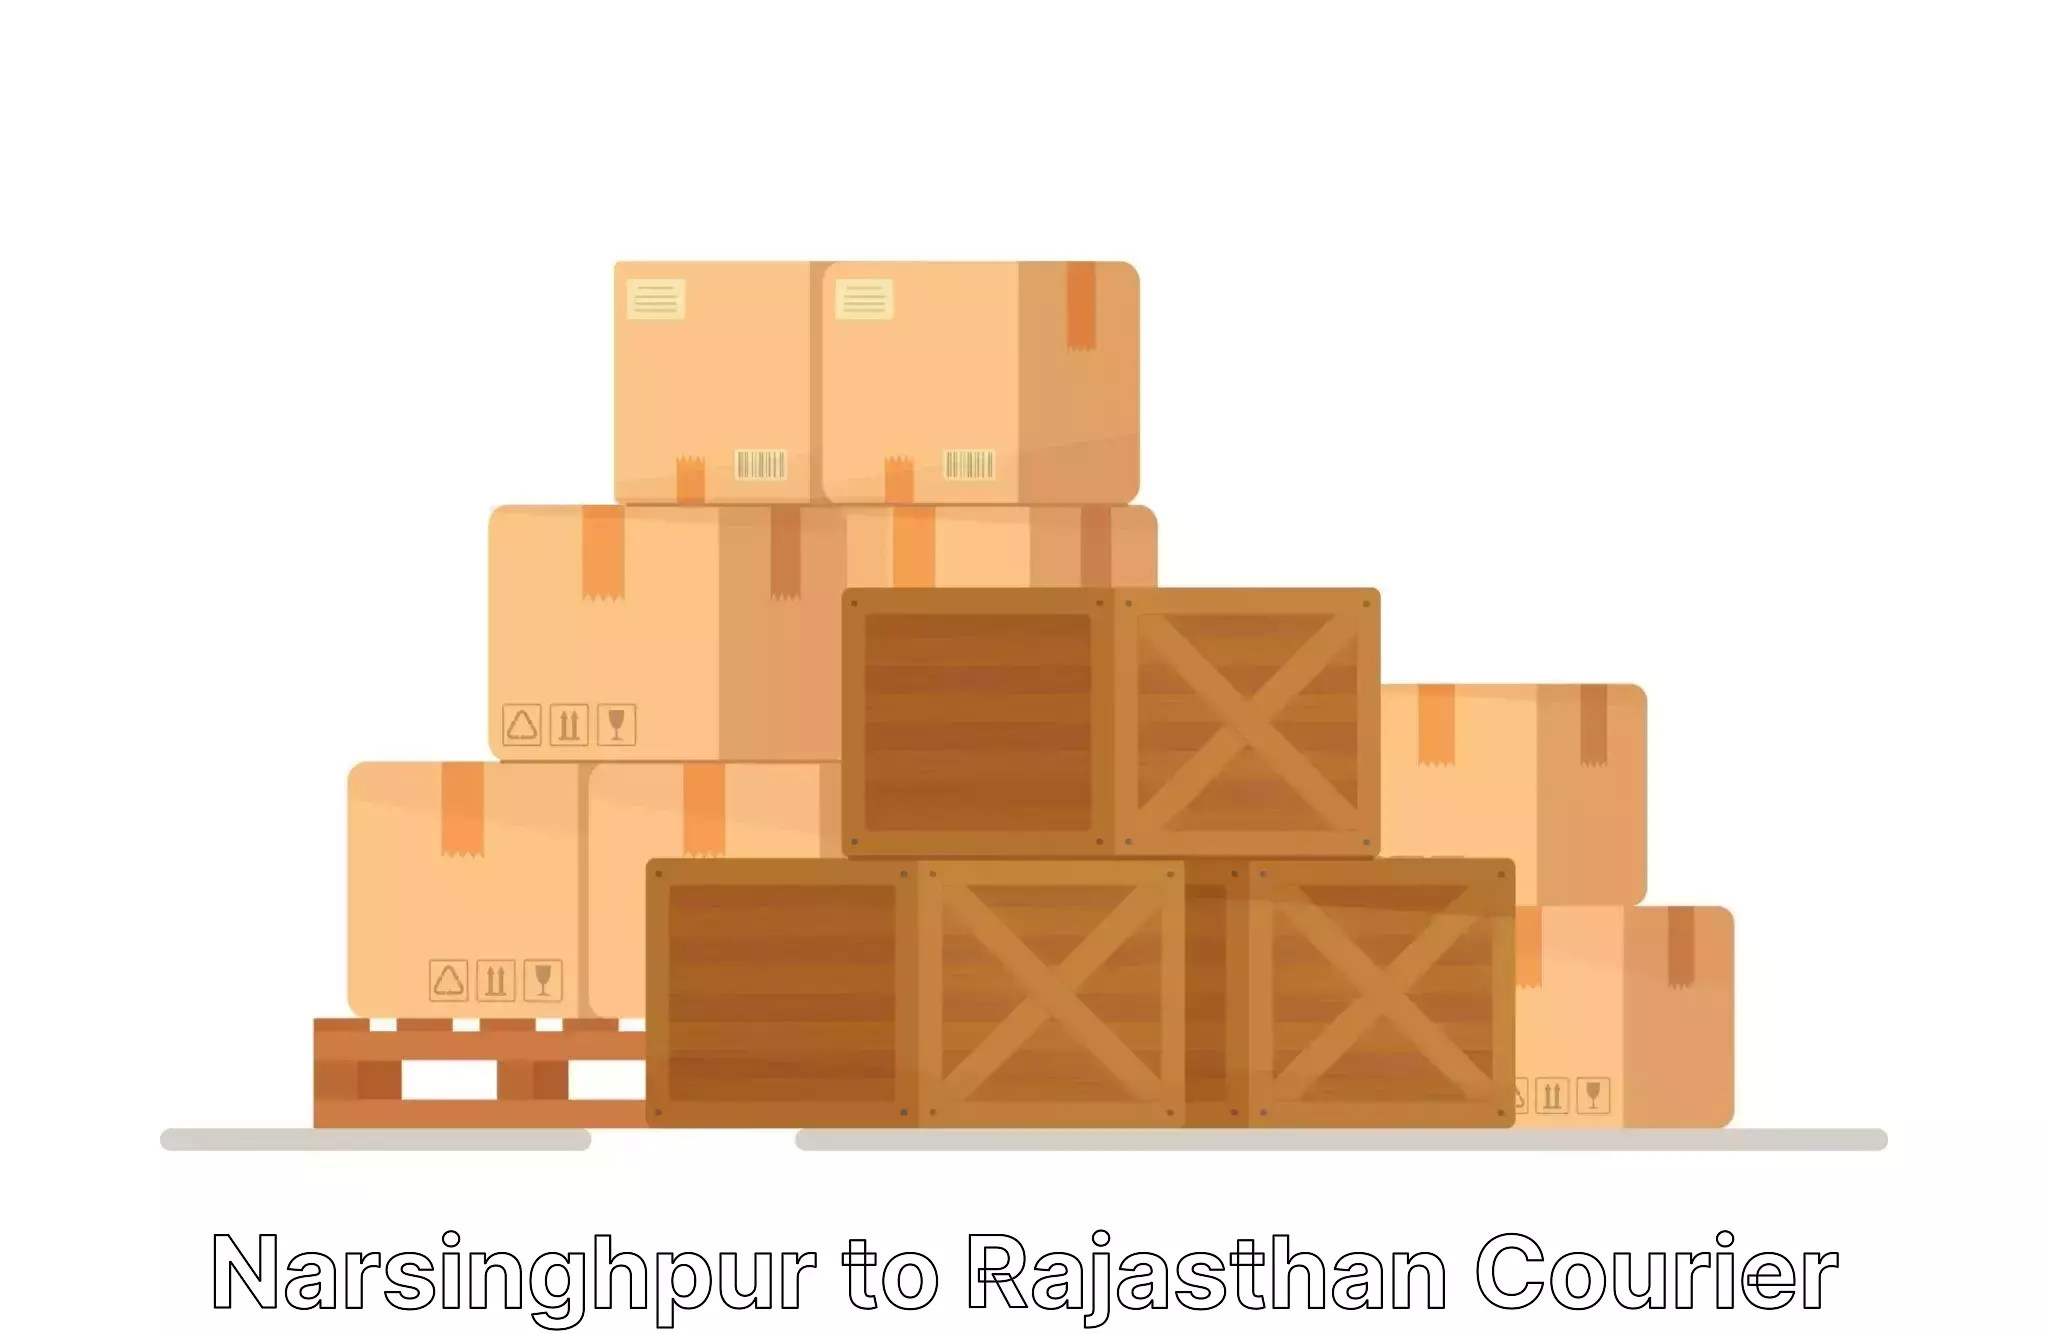 Furniture delivery service Narsinghpur to Piparcity